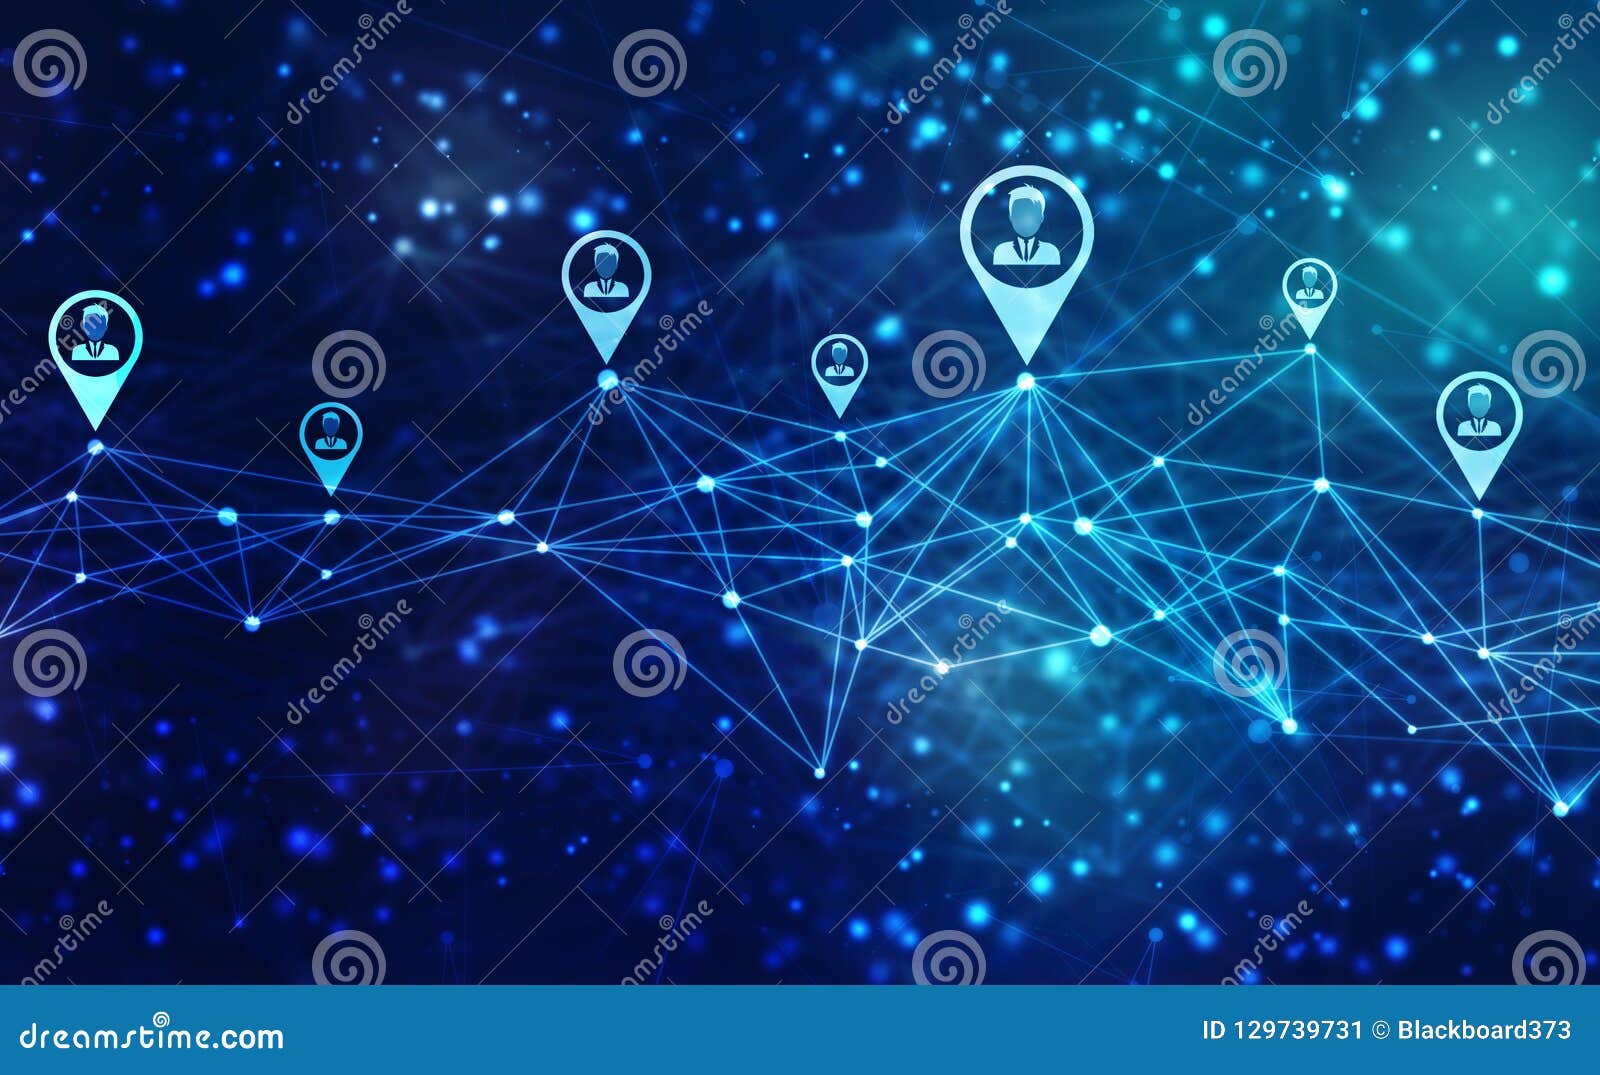 business network concept background, social networks and interaction concept